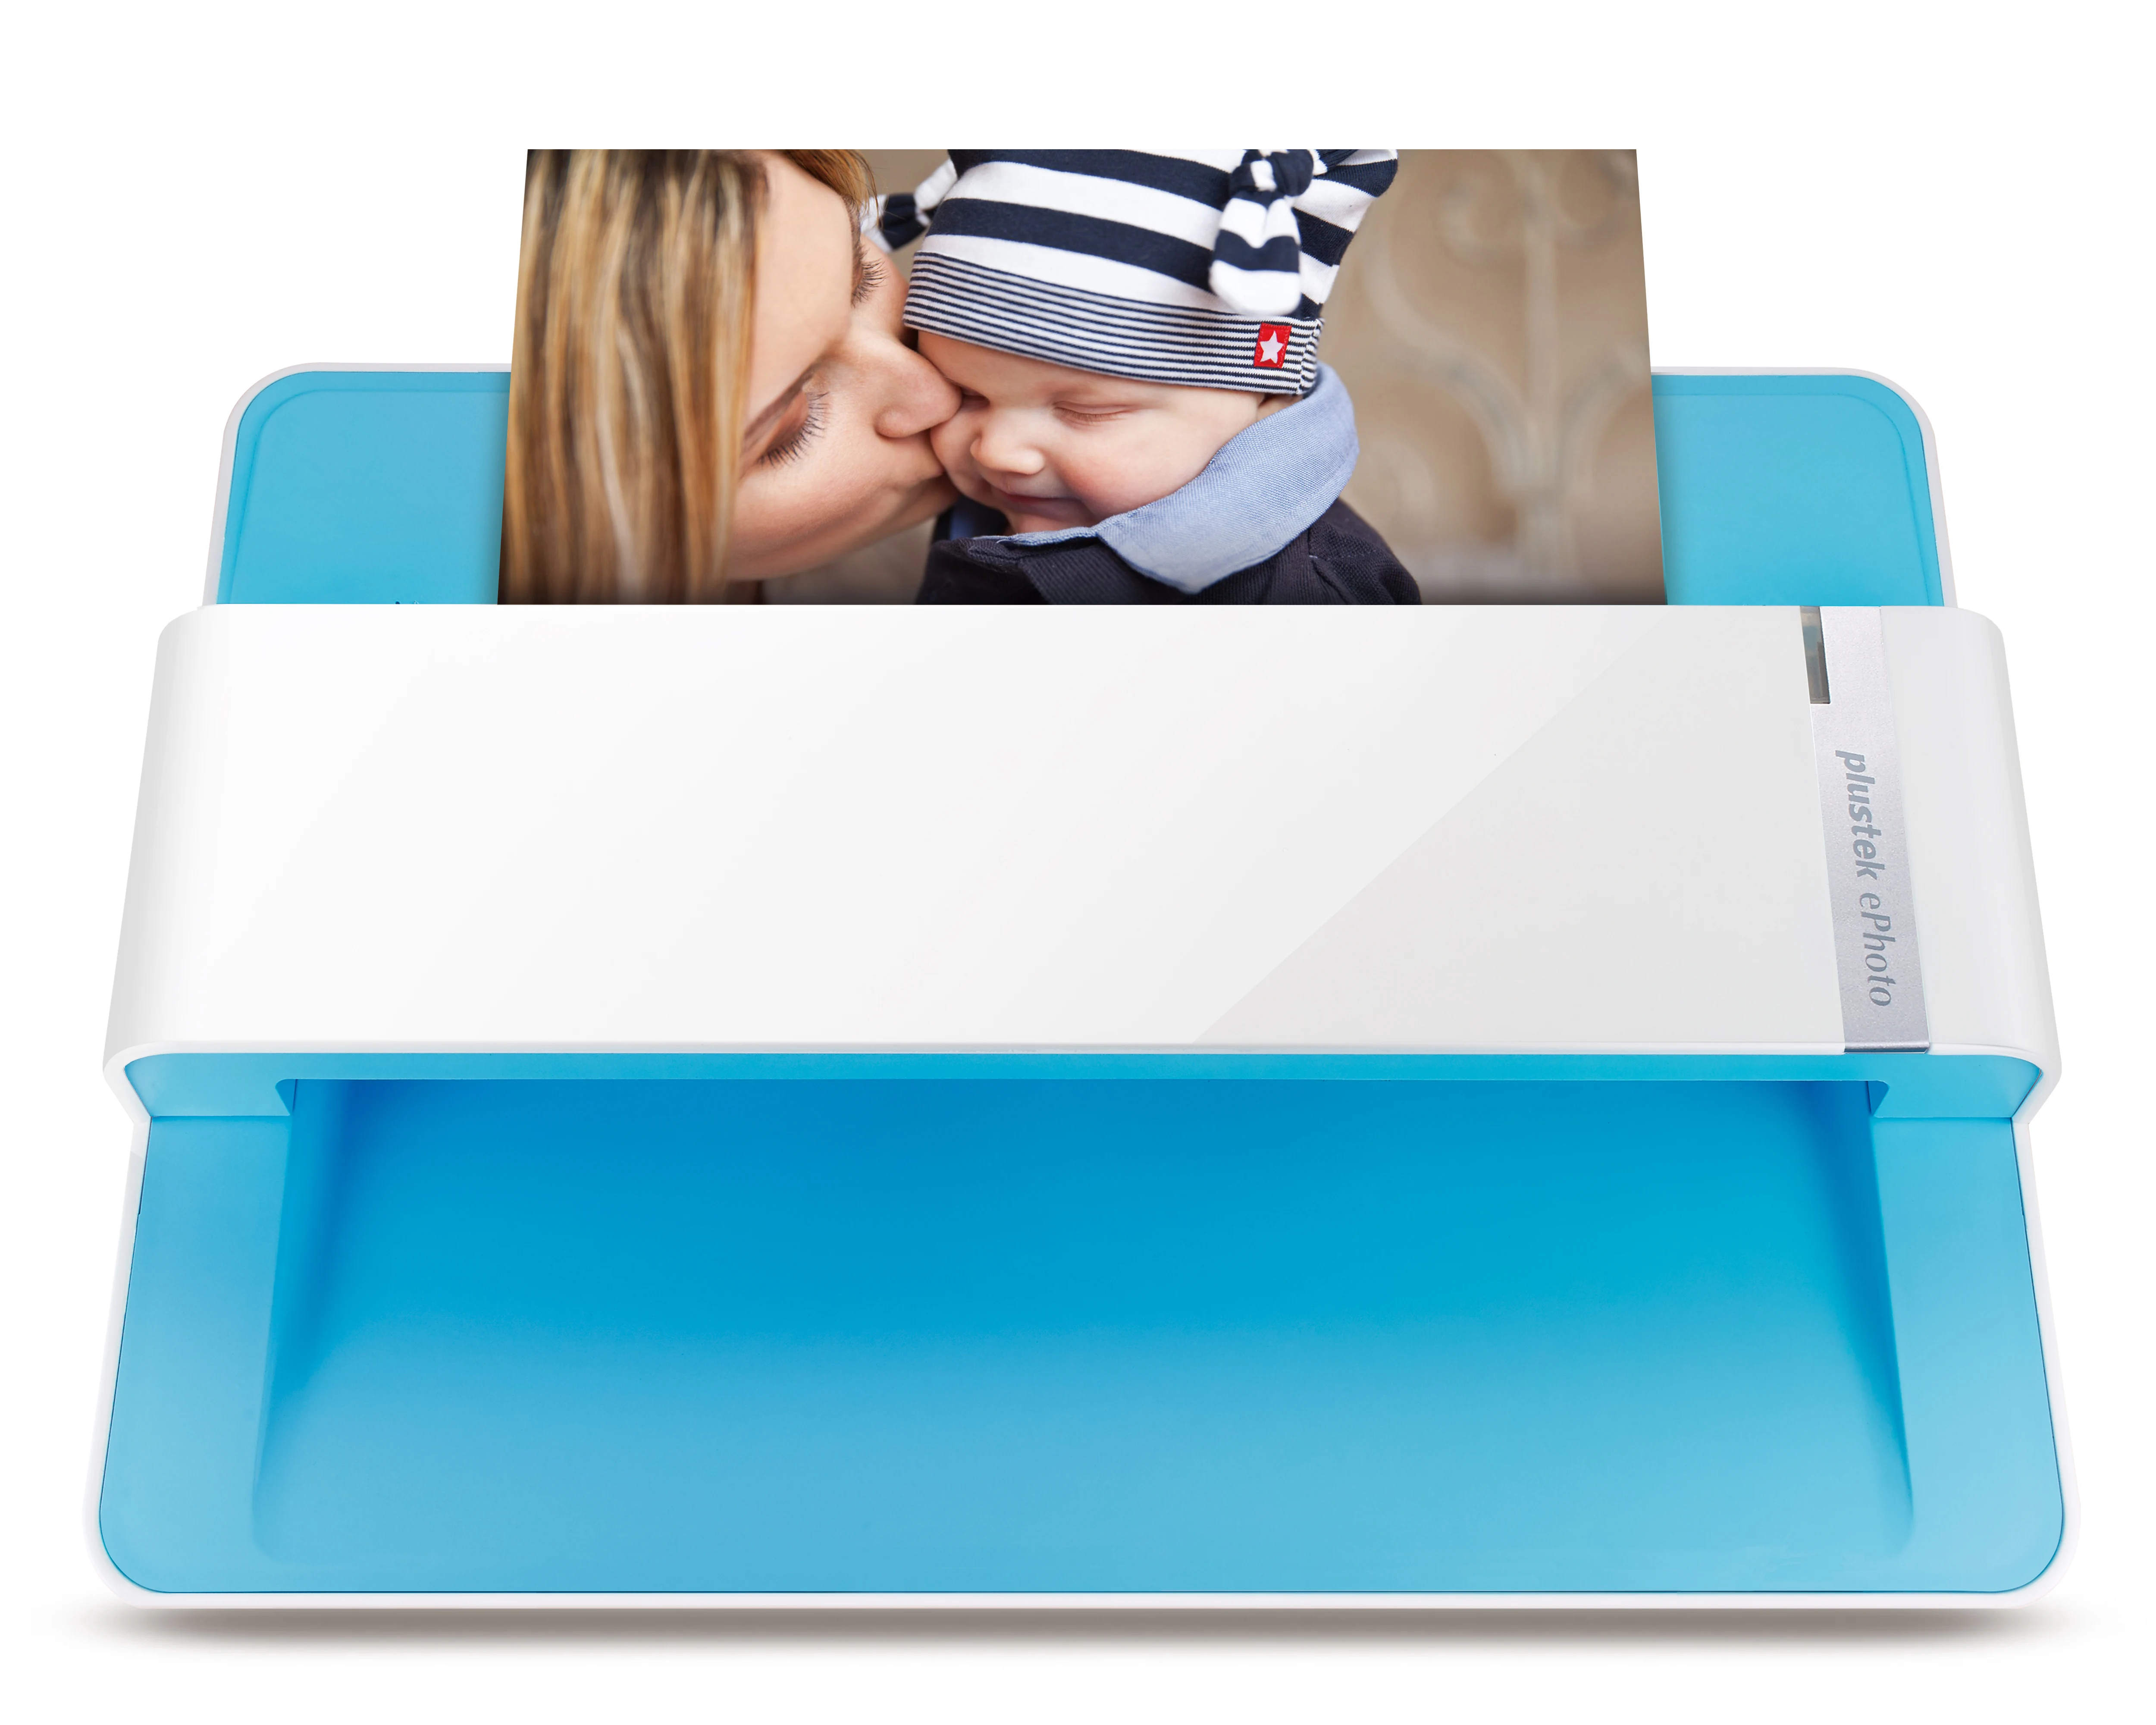 

Plustek Photo Scanner - ephoto Z300, Scan 4x6 Photo in 2sec, Auto Crop and Deskew with CCD Sensor. Support Mac and Windows